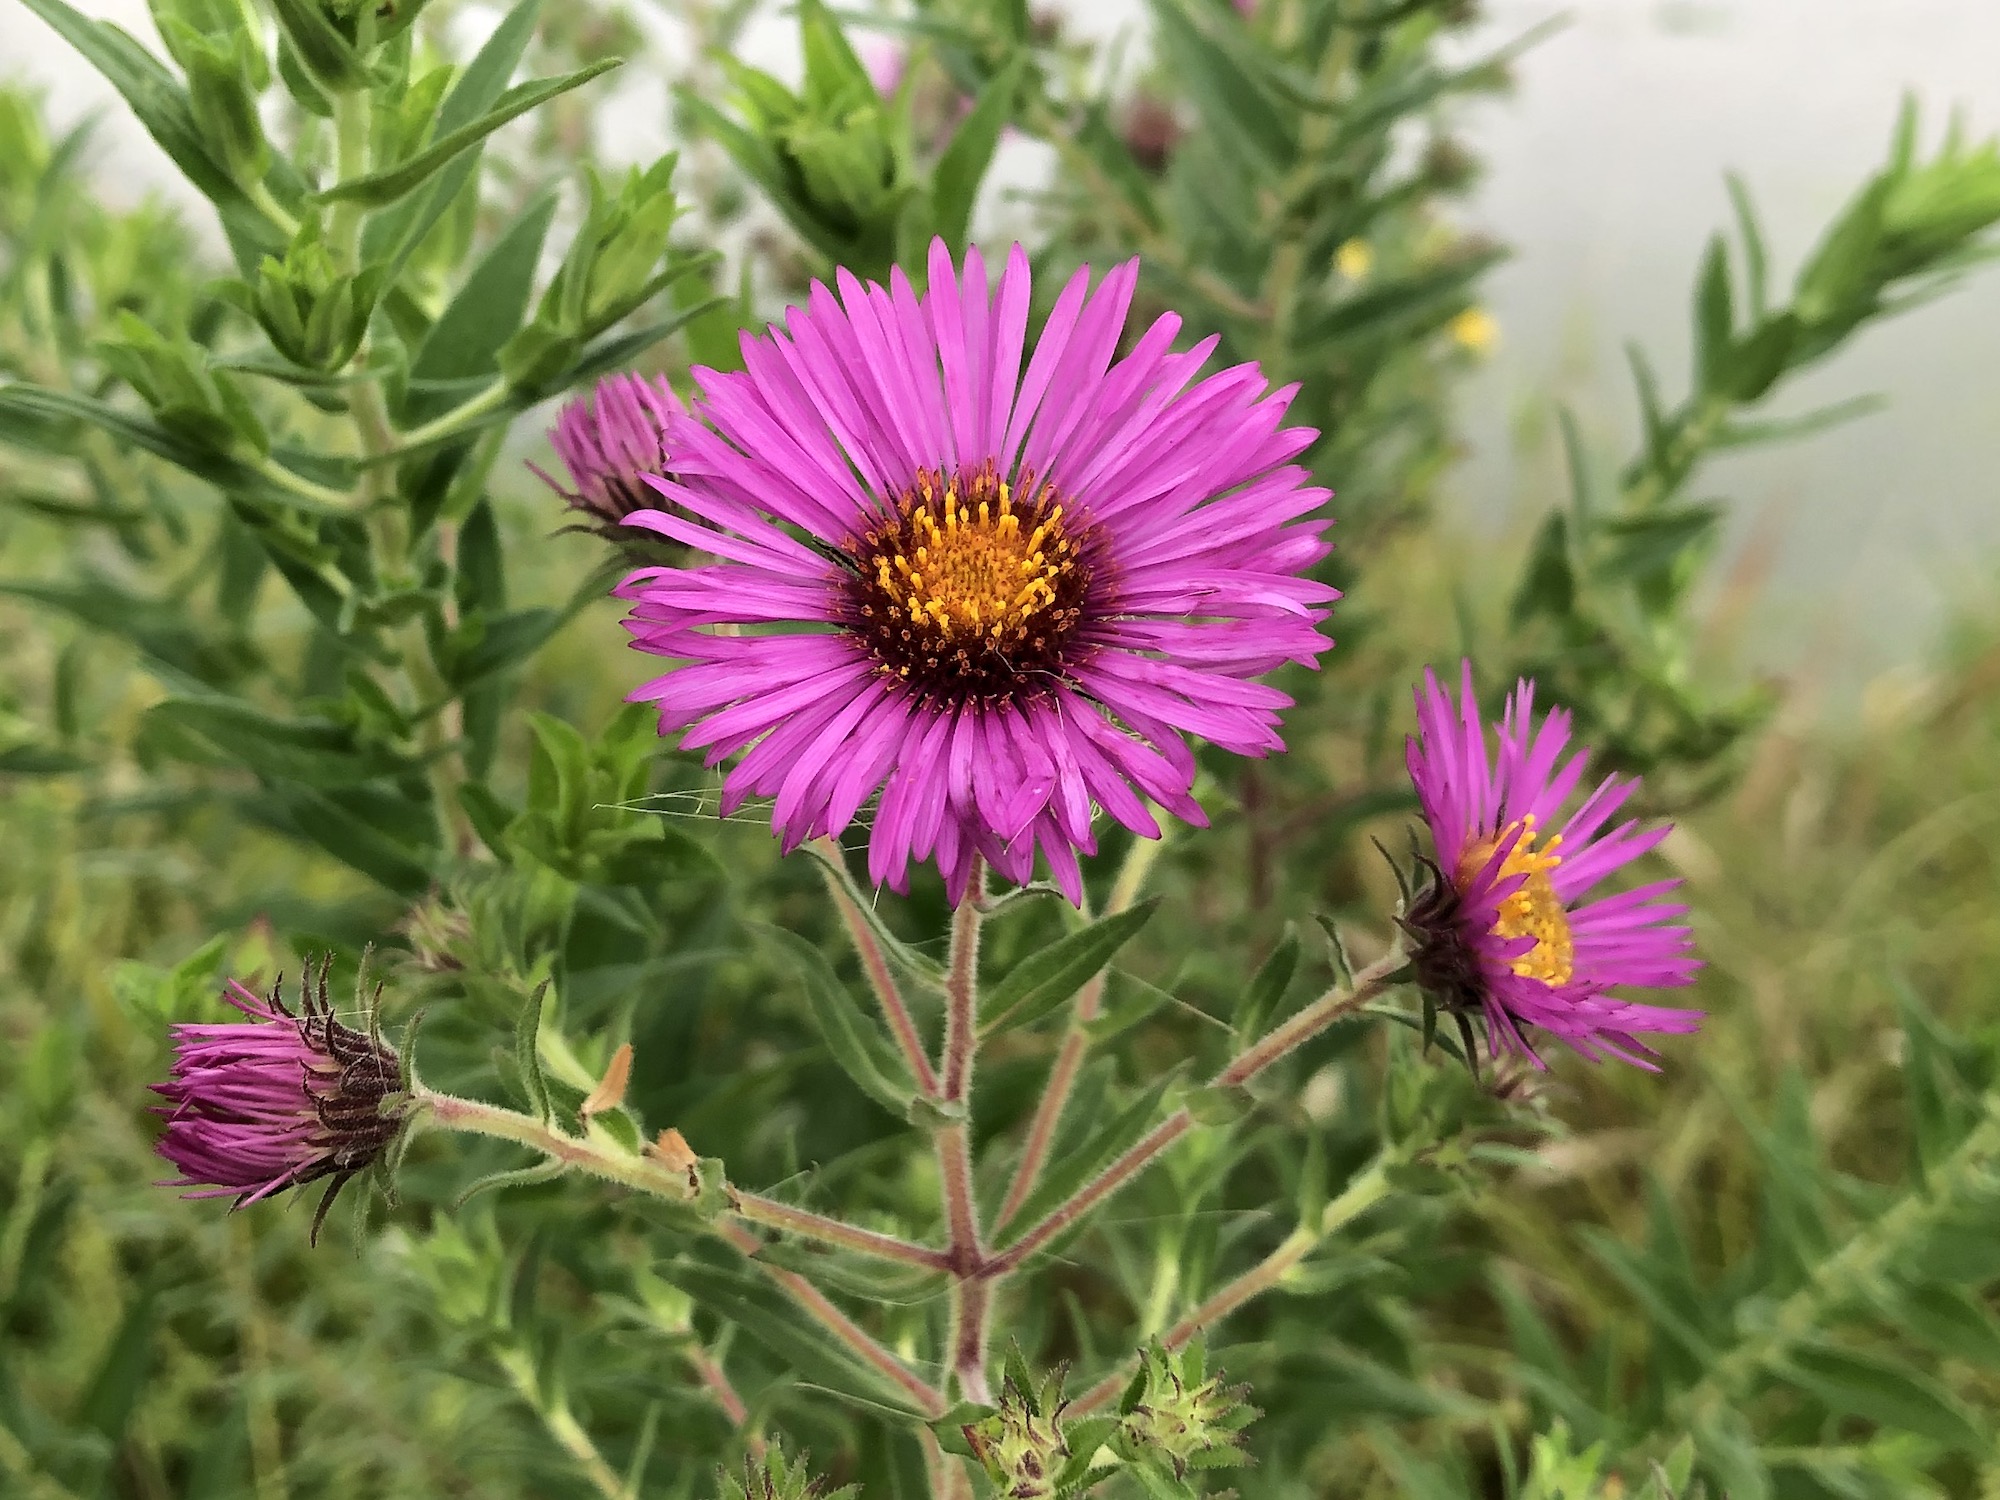 New England Aster on shore of Lake Wingra in Vilas in Madison, Wisconsin on September 4, 2021.